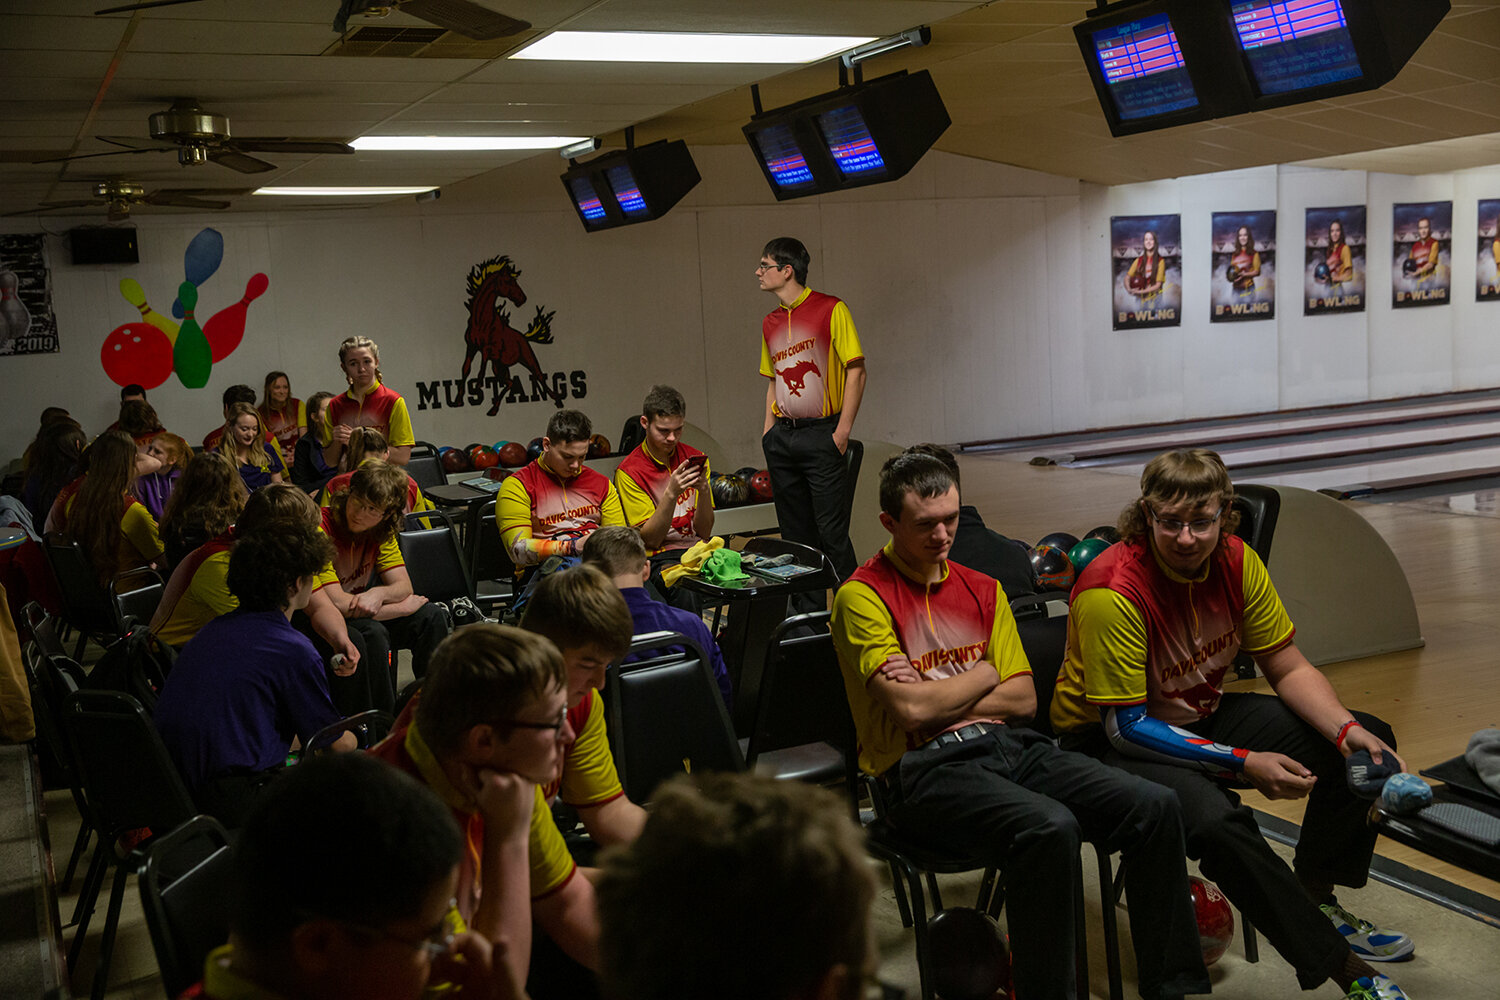  Davis County High School bowling team waiting to compete against Sigourney, Bloomfield. (Davis County) 